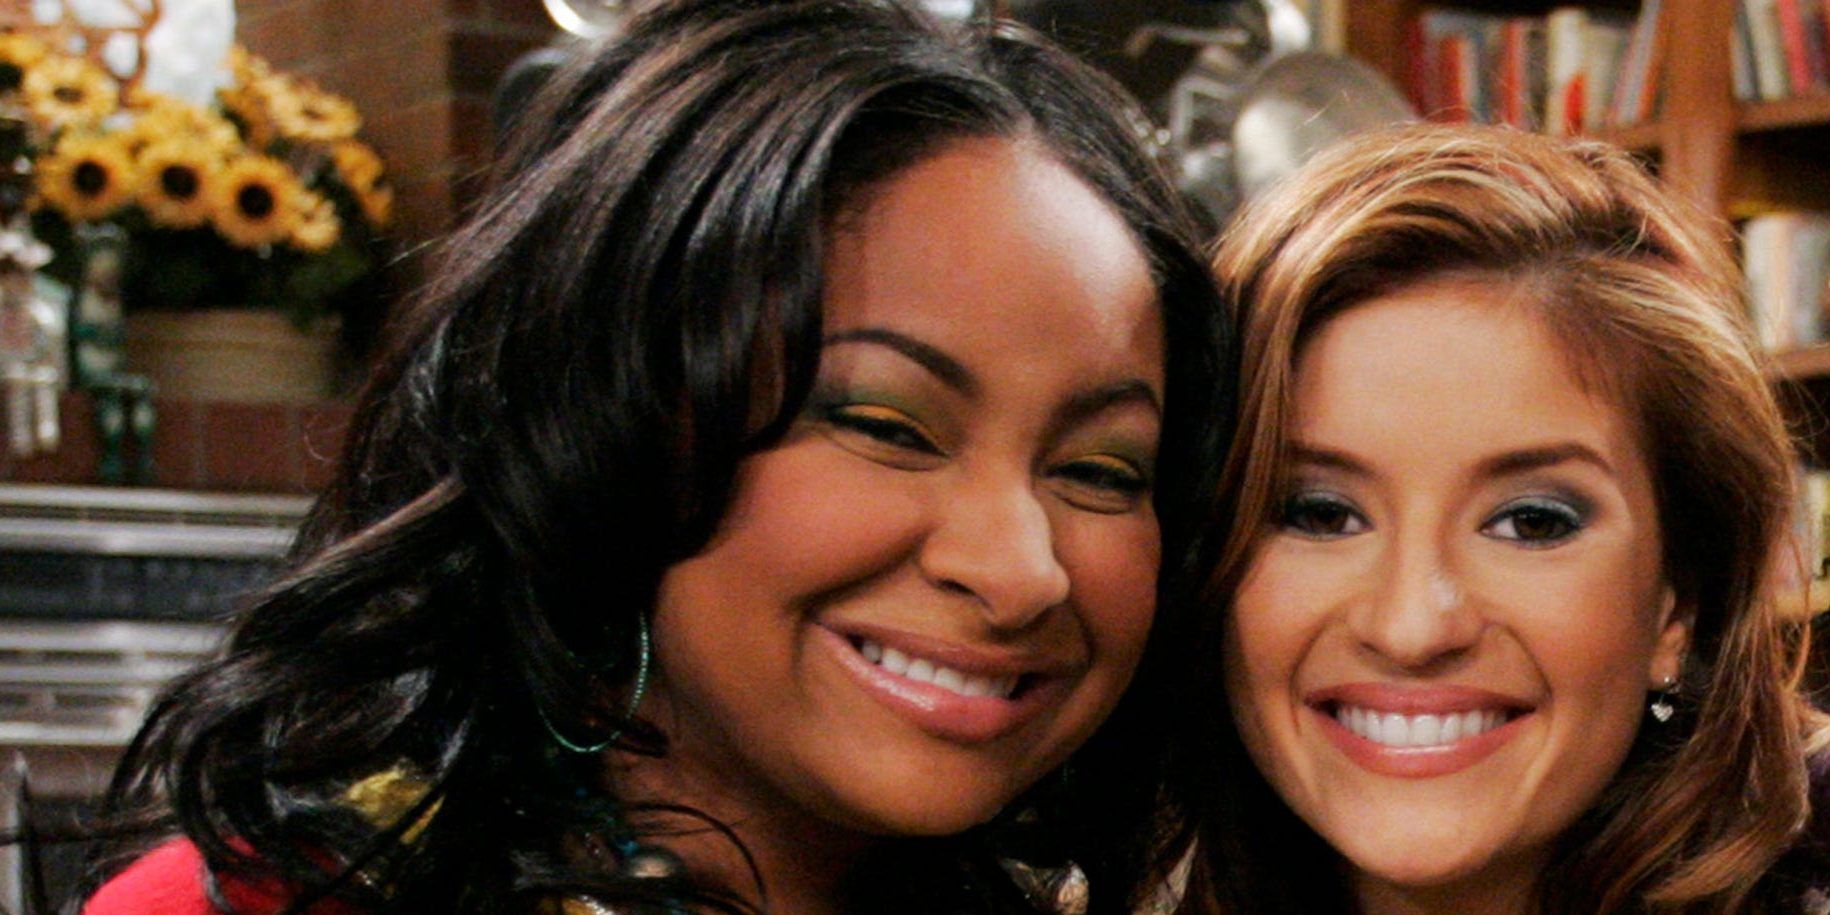 That's So Raven, Raven and Chelsea